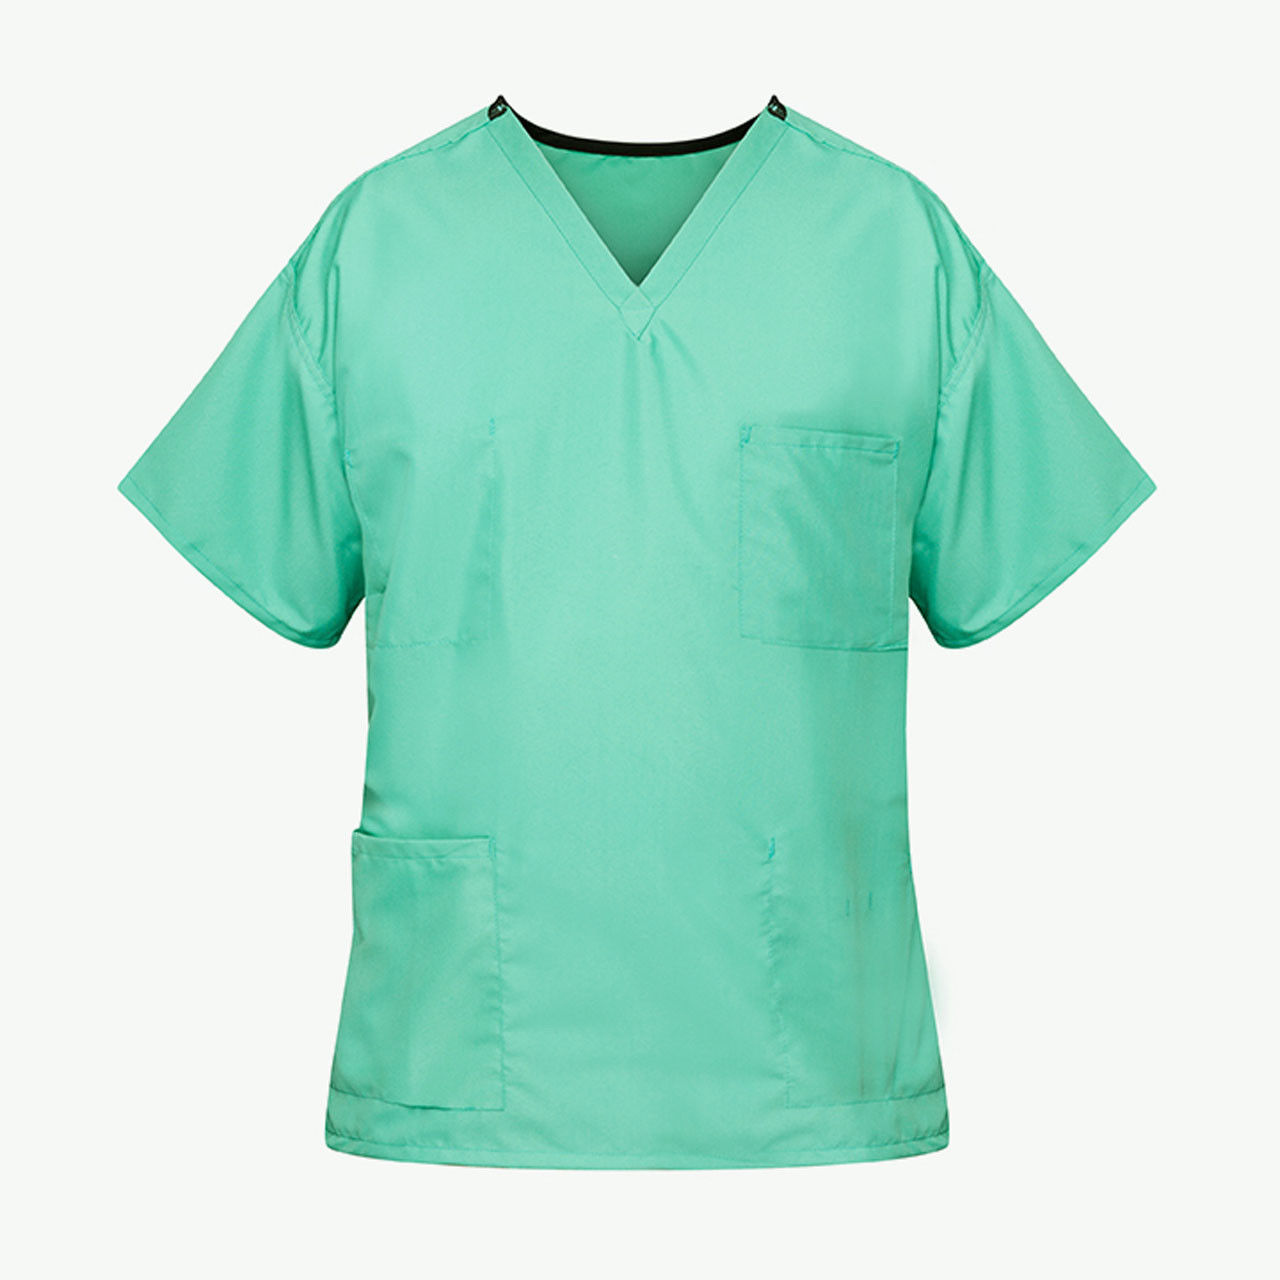 Does the jade green scrub top include a measuring conversion guide?